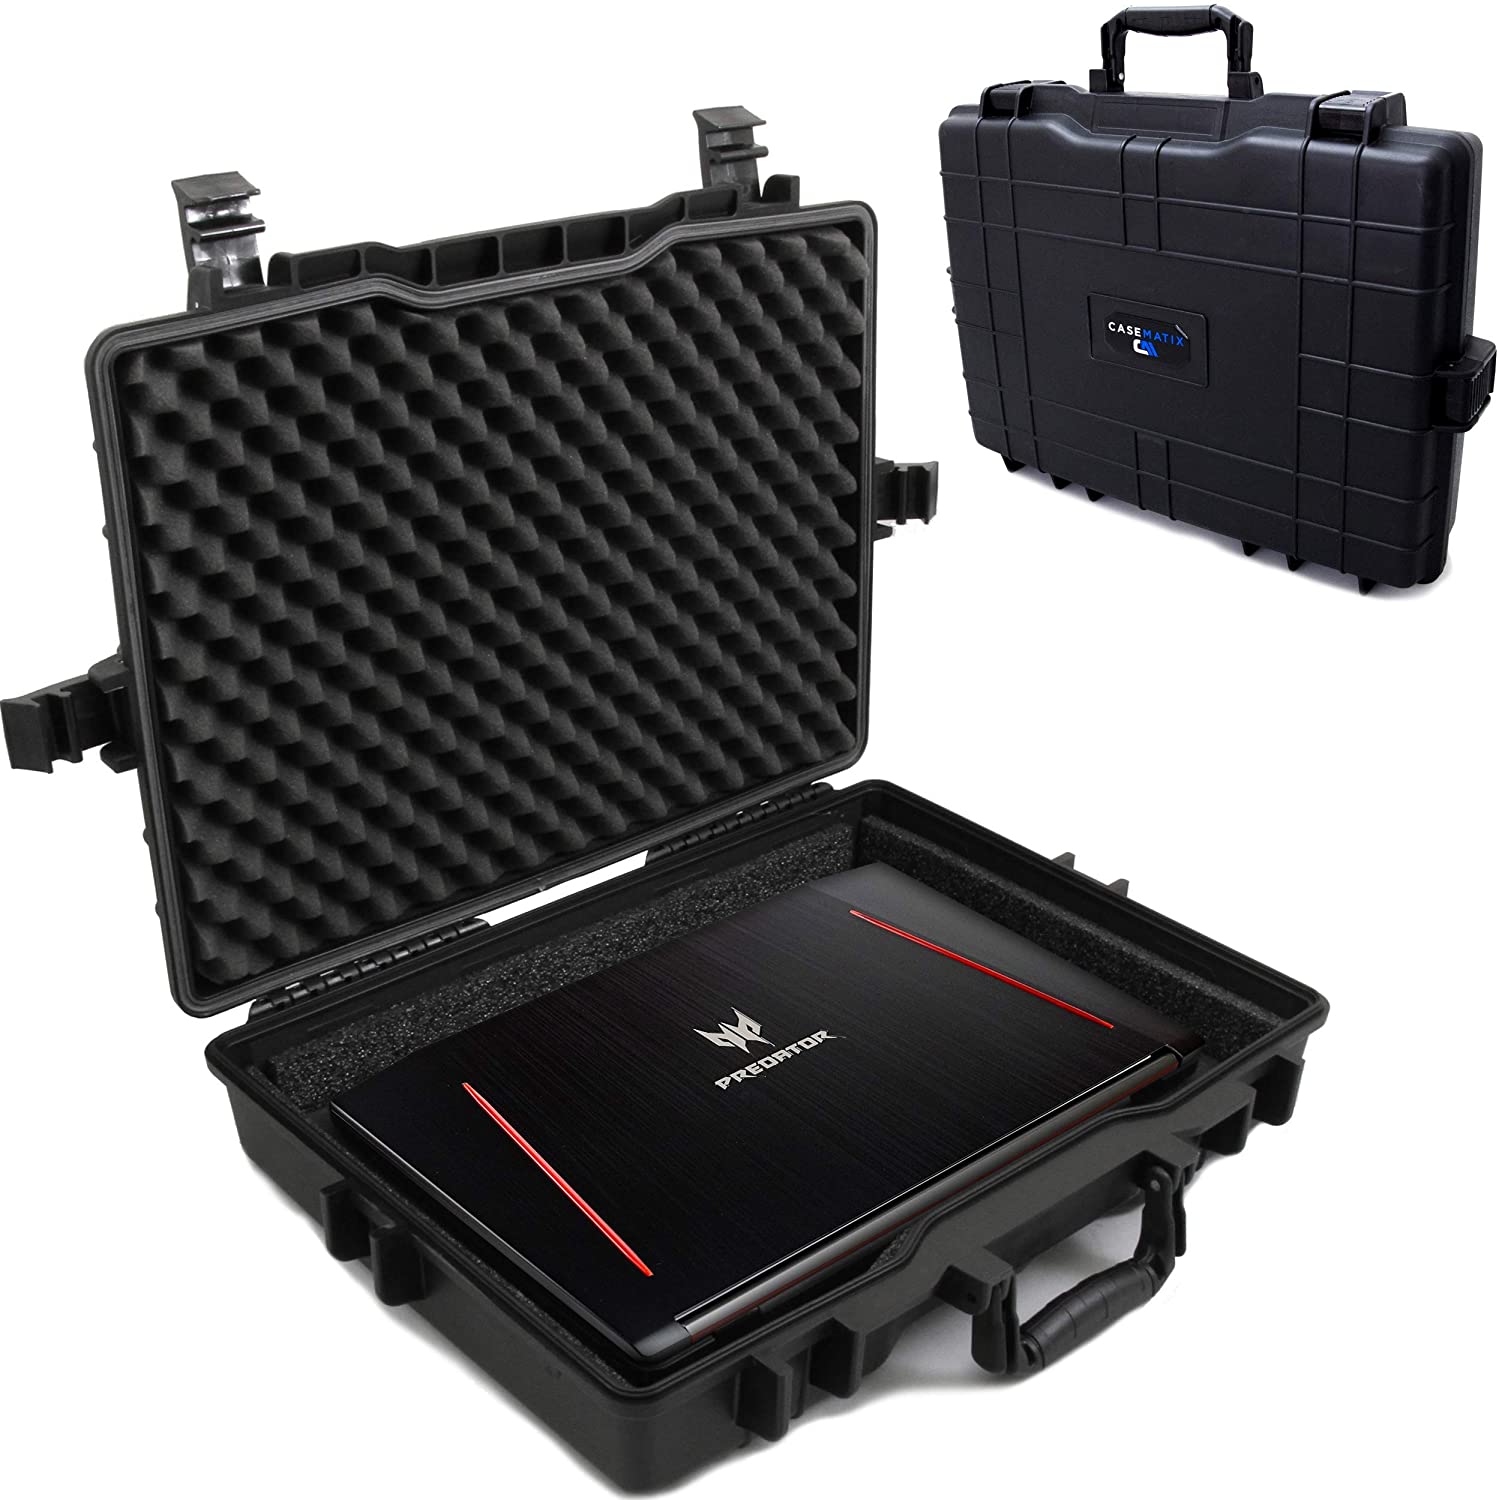 CASEMATIX Hard Shell Travel Case Compatible with PlayStation 5 Console,  Controllers, Games and Accessories - Waterproof PS5 Carrying Case with Foam